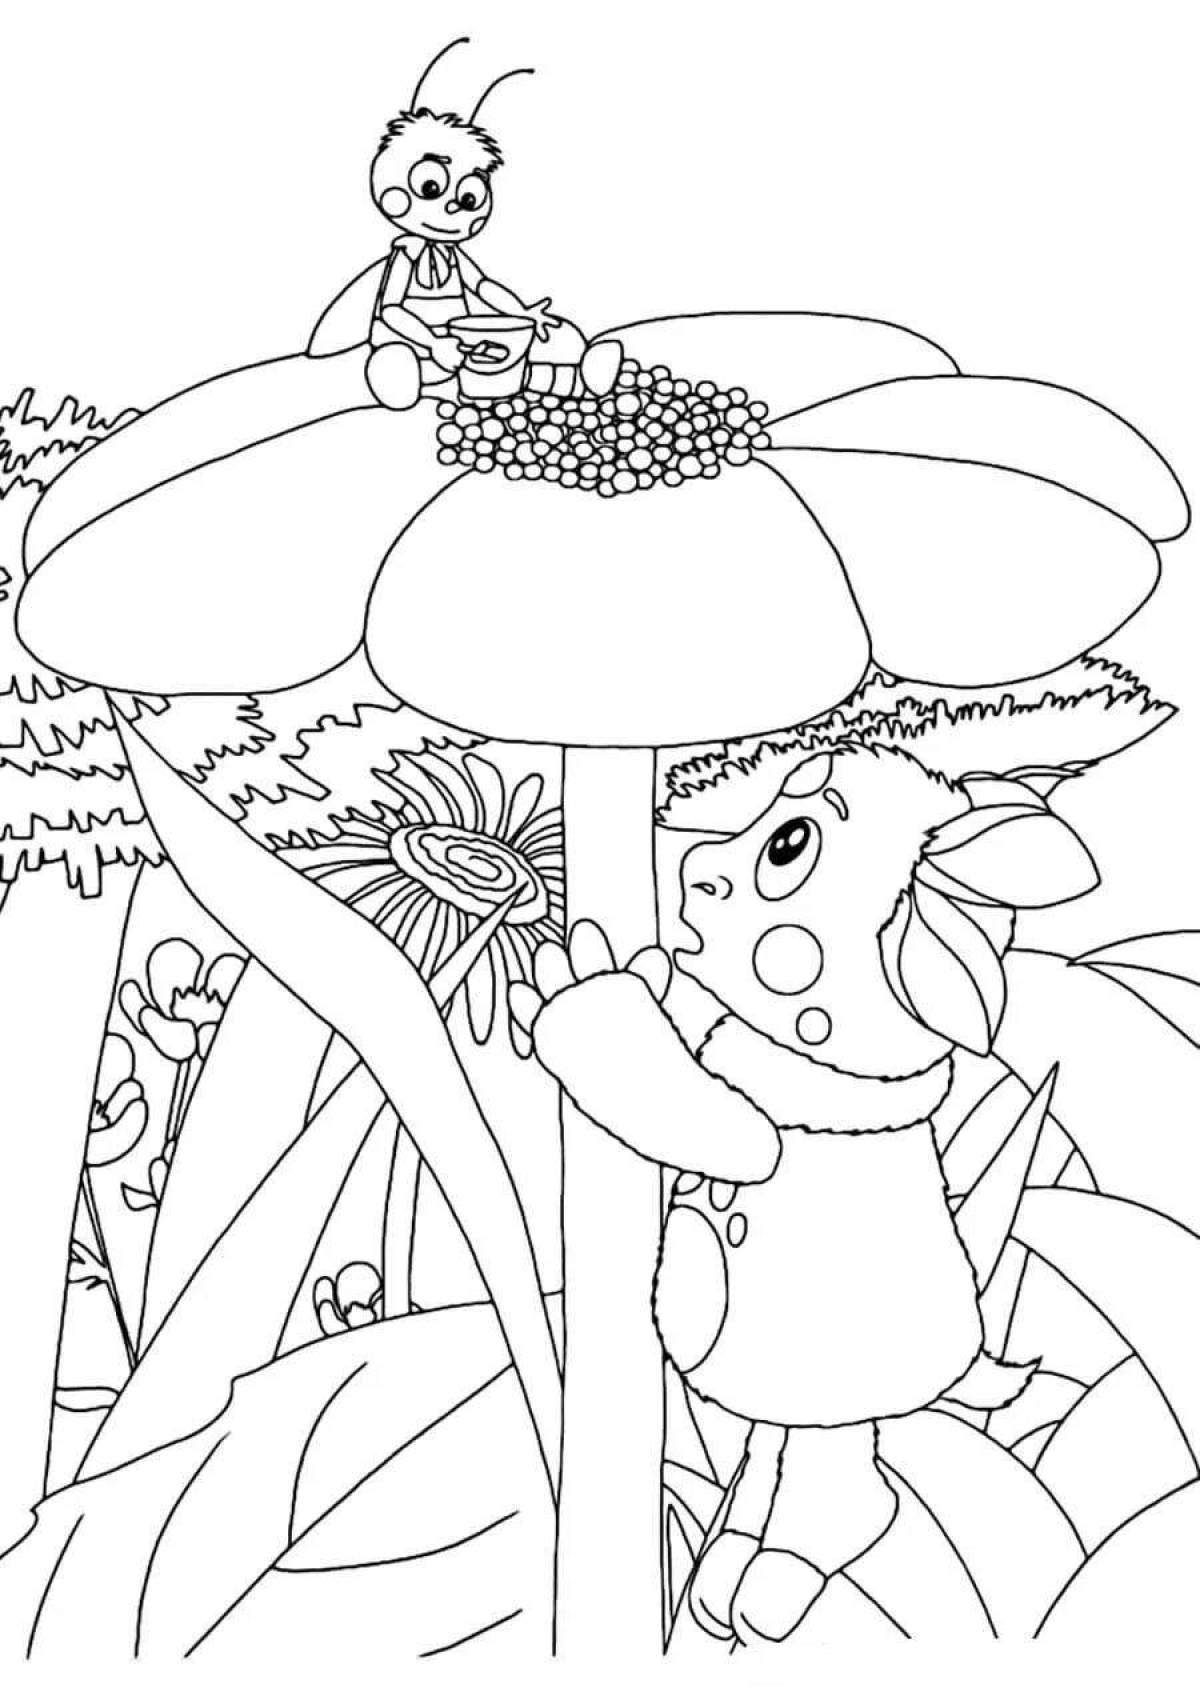 Fun coloring pages of butterflies from Luntik